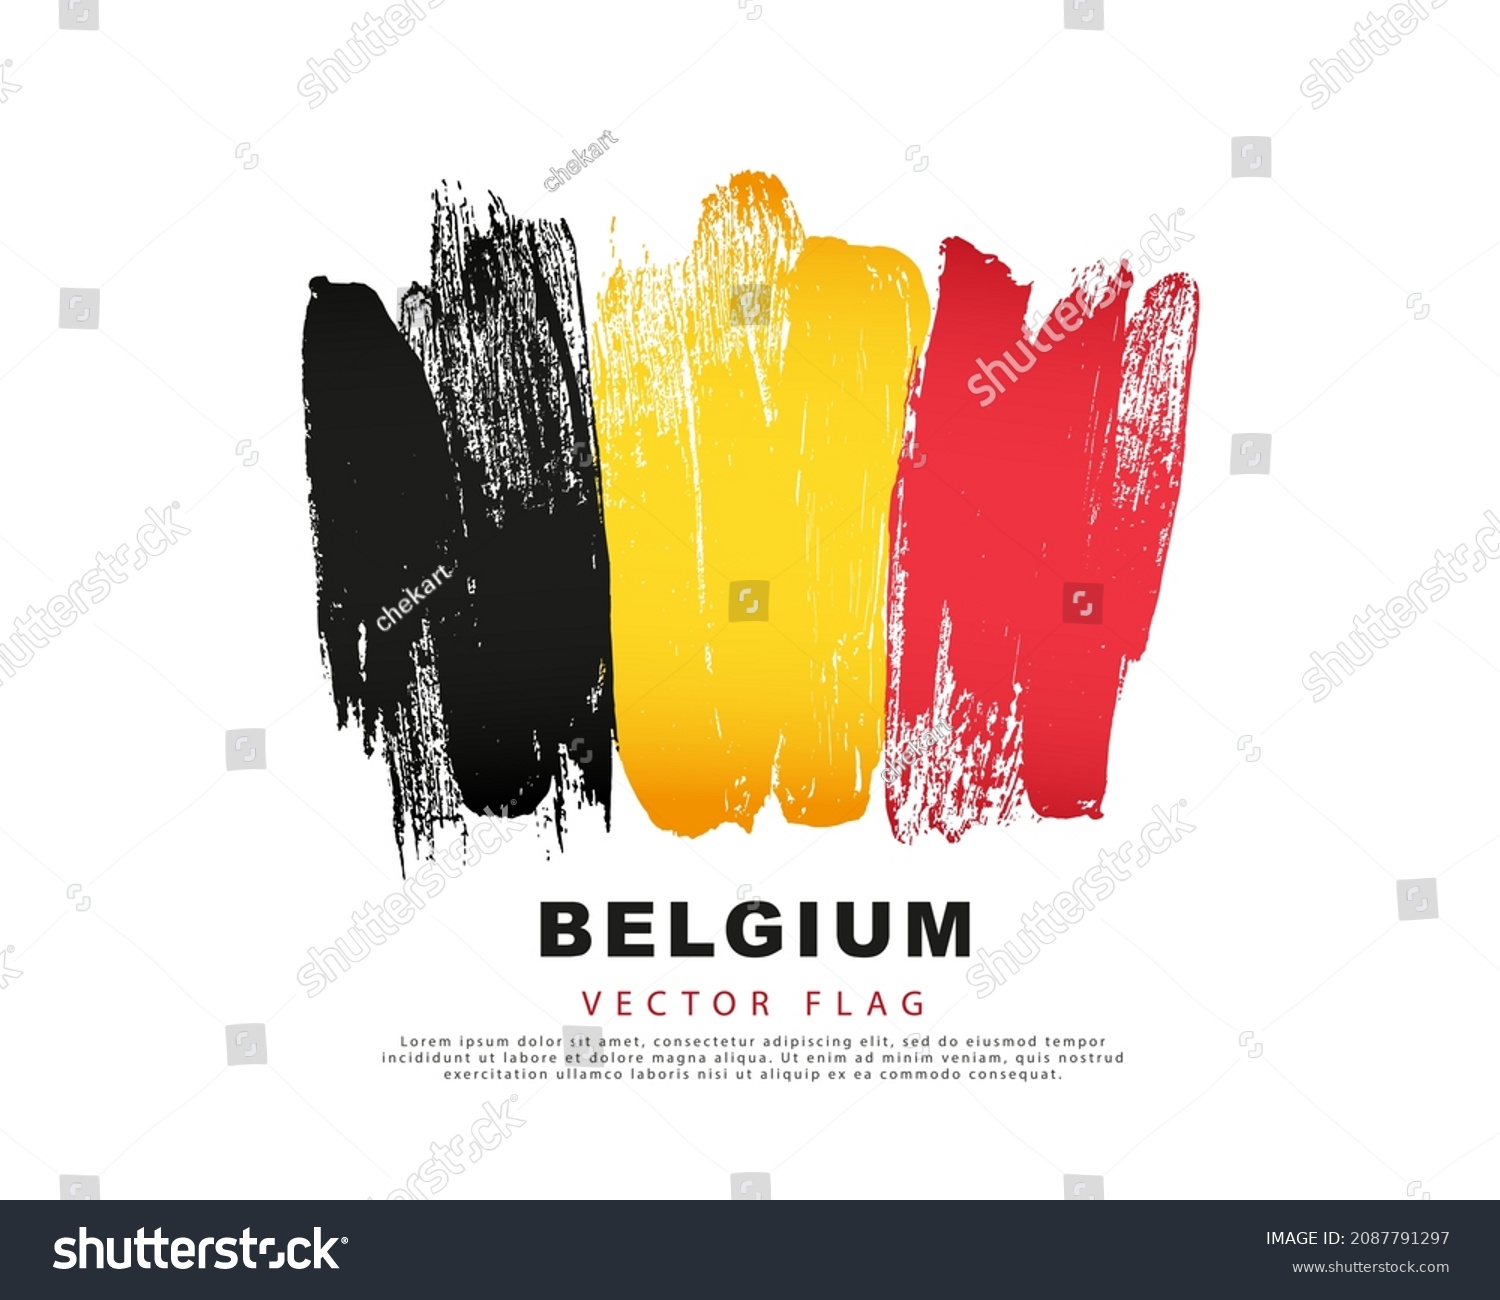 Belgium flag. Freehand black, yellow and red brush strokes. Vector illustration isolated on white background. Belgian flag colorful logo. #2087791297